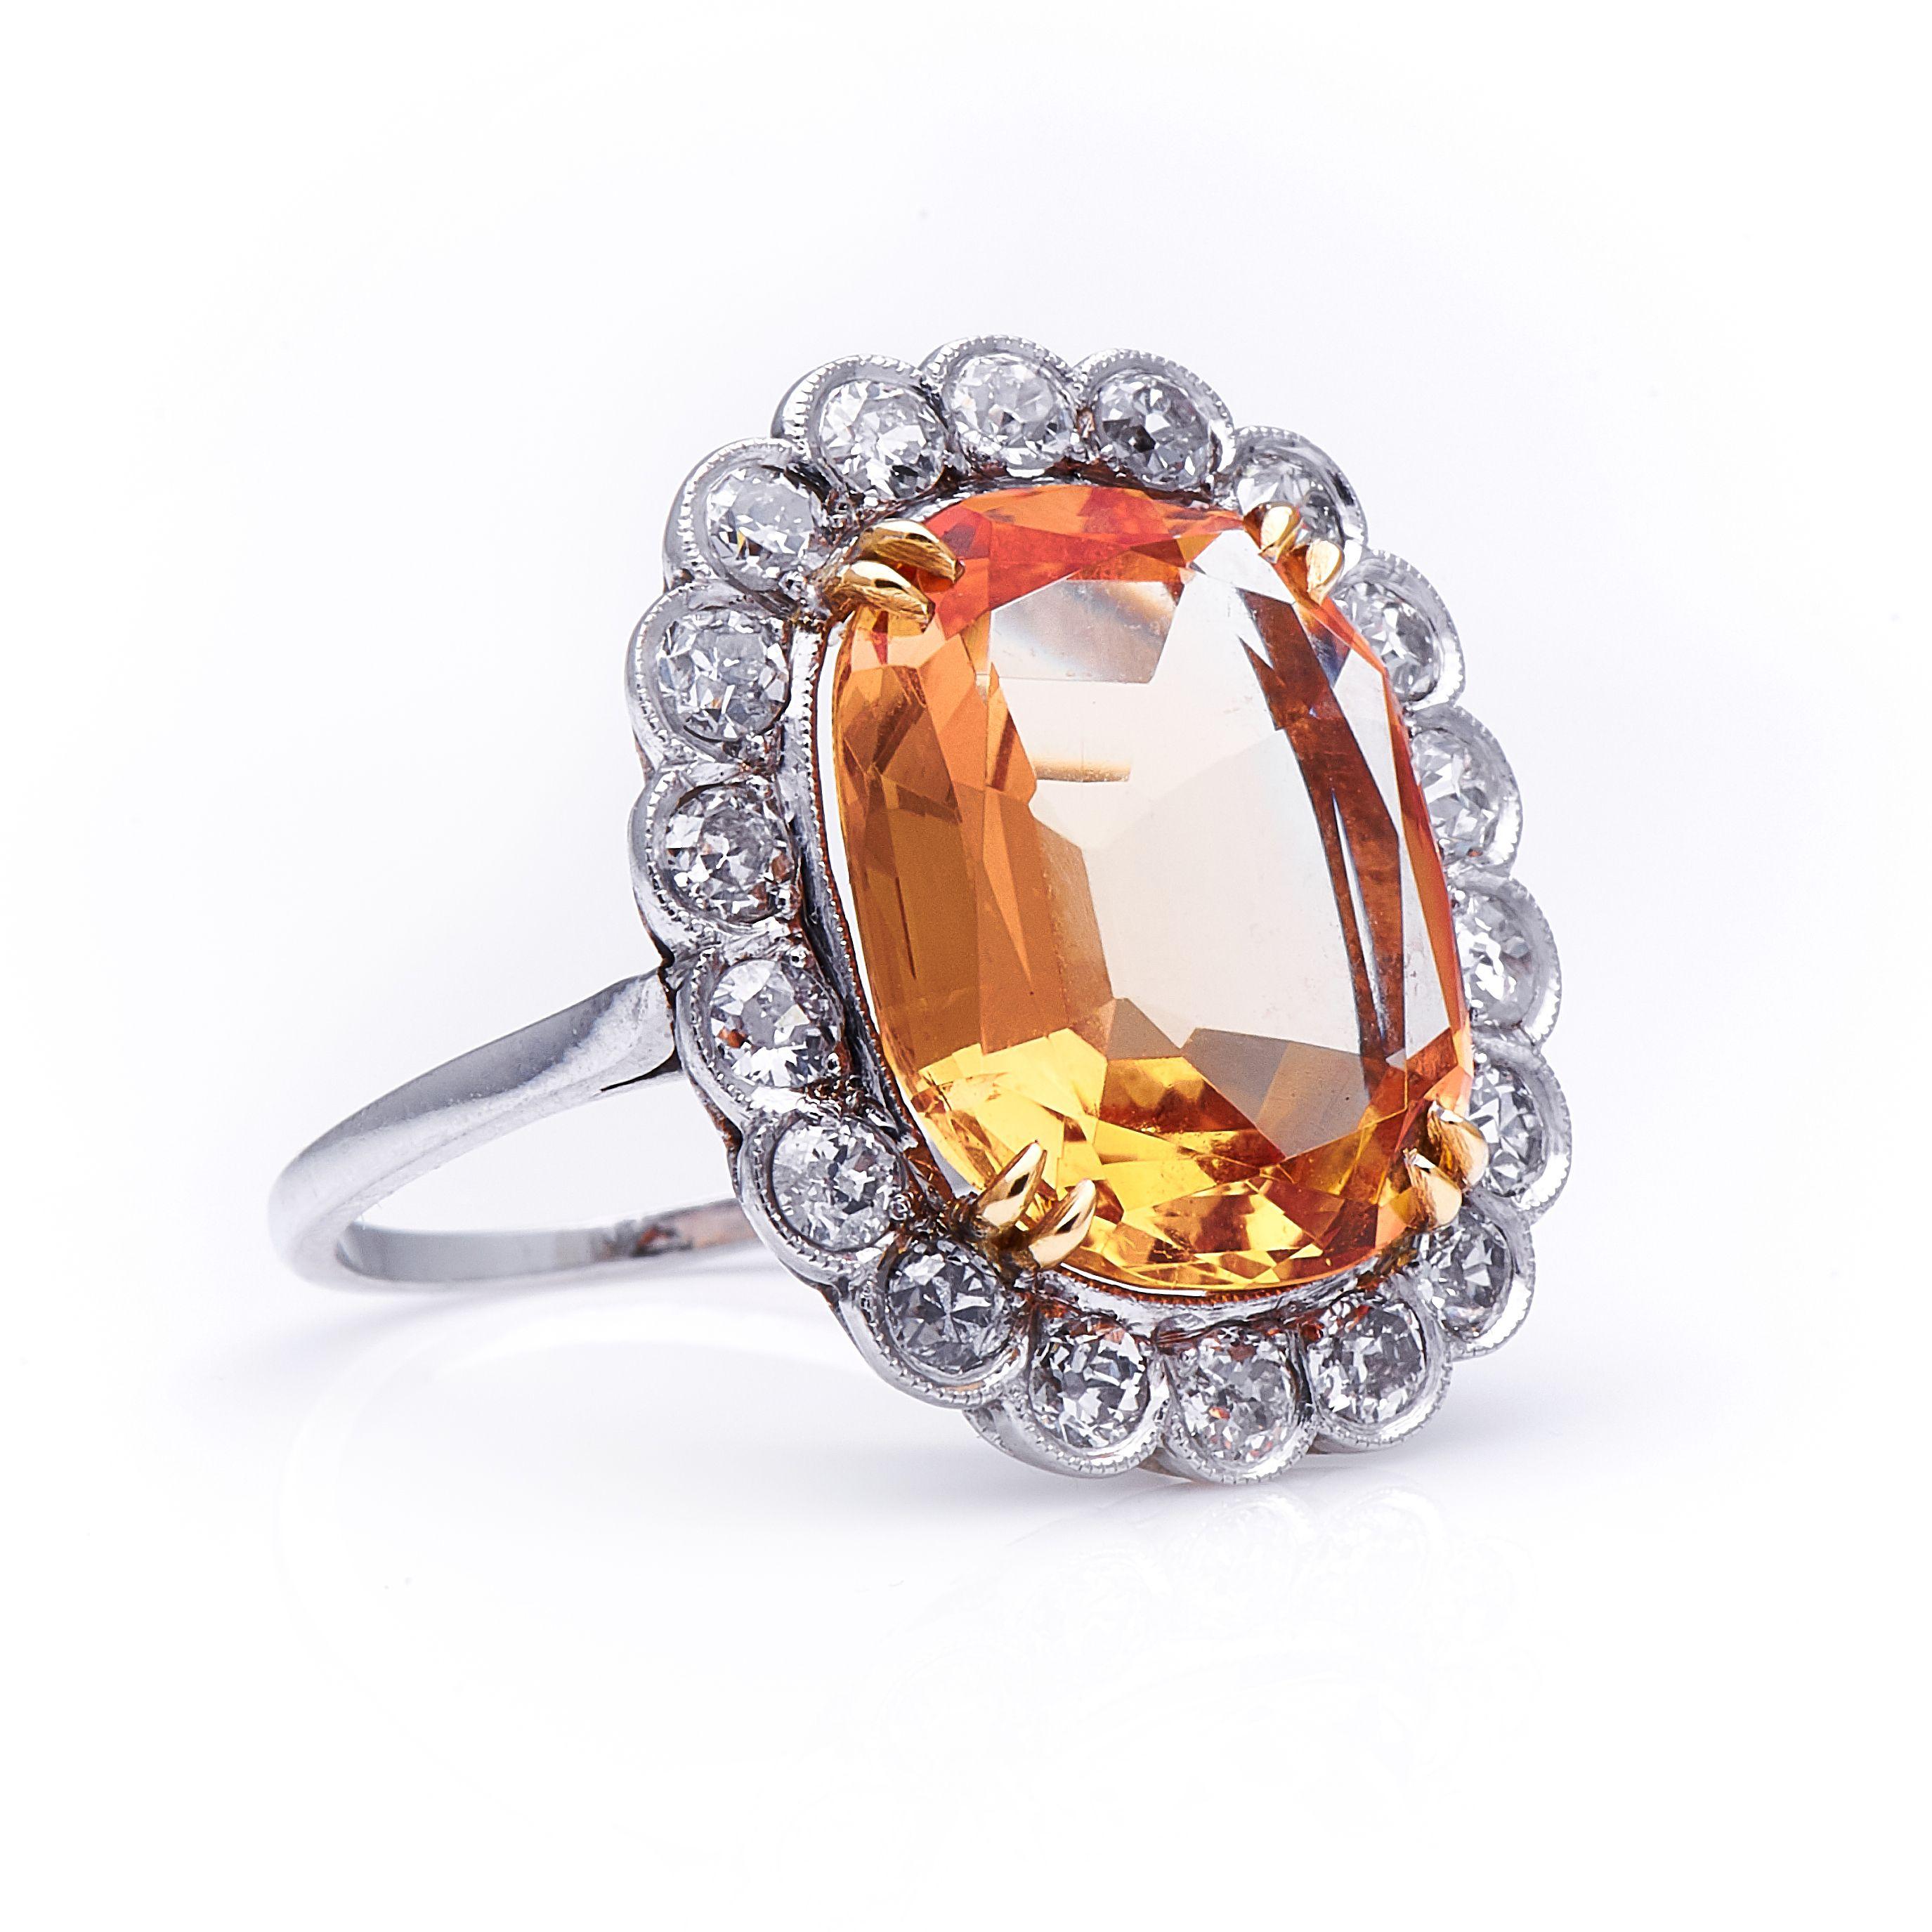 Imperial Topaz and diamond ring, circa 1900. The pale, golden yellow of this topaz is perhaps the colour most historically associated with the stone, which shot to popularity in the late 18thand early 19thcenturies due to its flattering and delicate